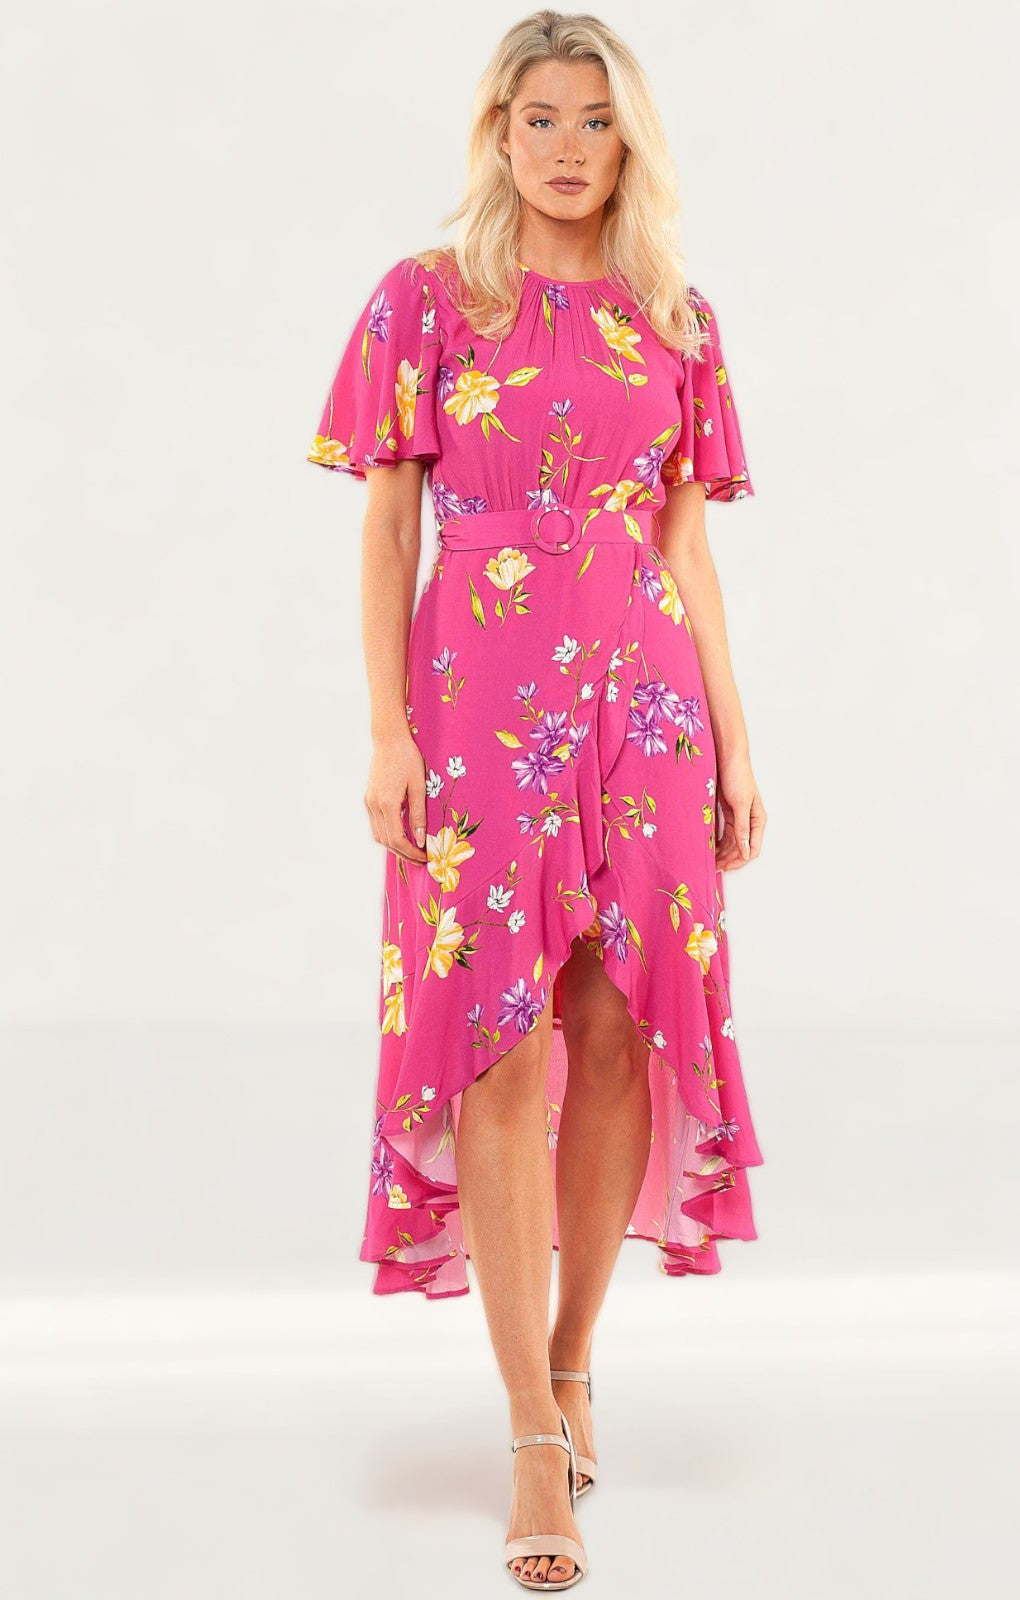 French Connection Very Berry Emina Drape Dress product image